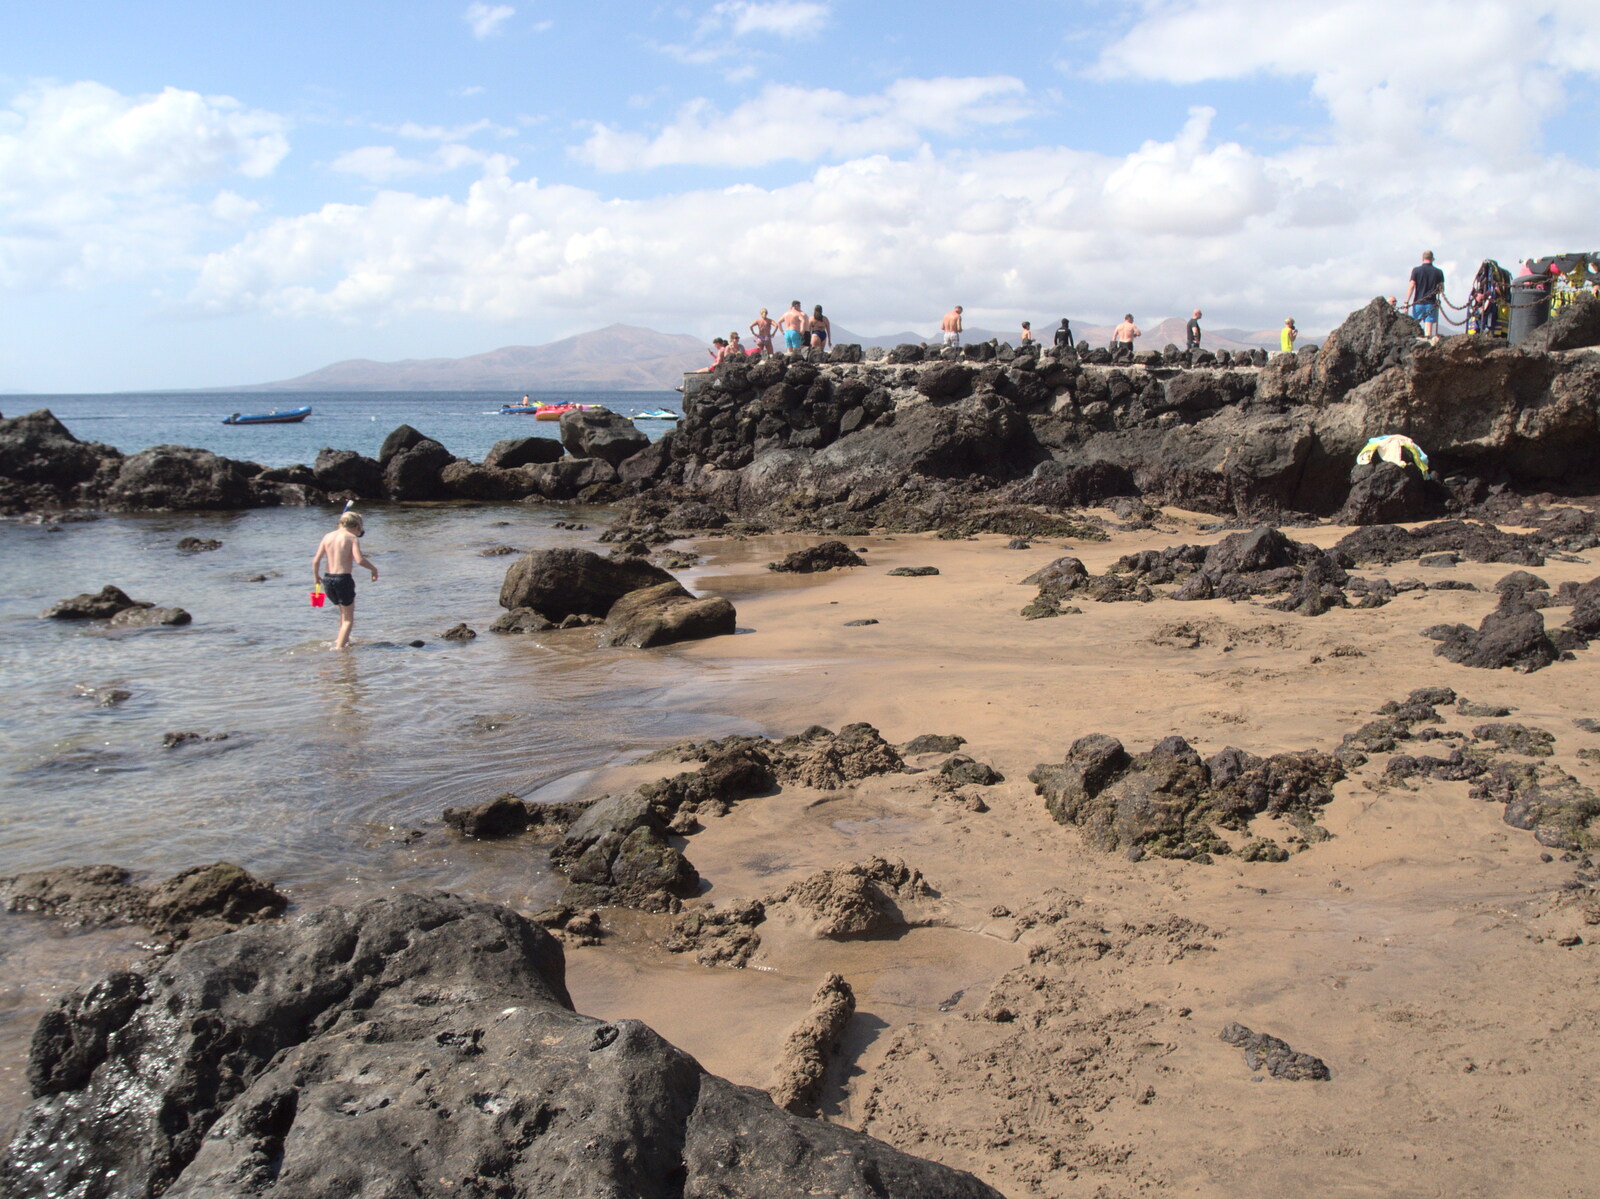 Playa Chica and the pier from The Volcanoes of Lanzarote, Canary Islands, Spain - 27th October 2021